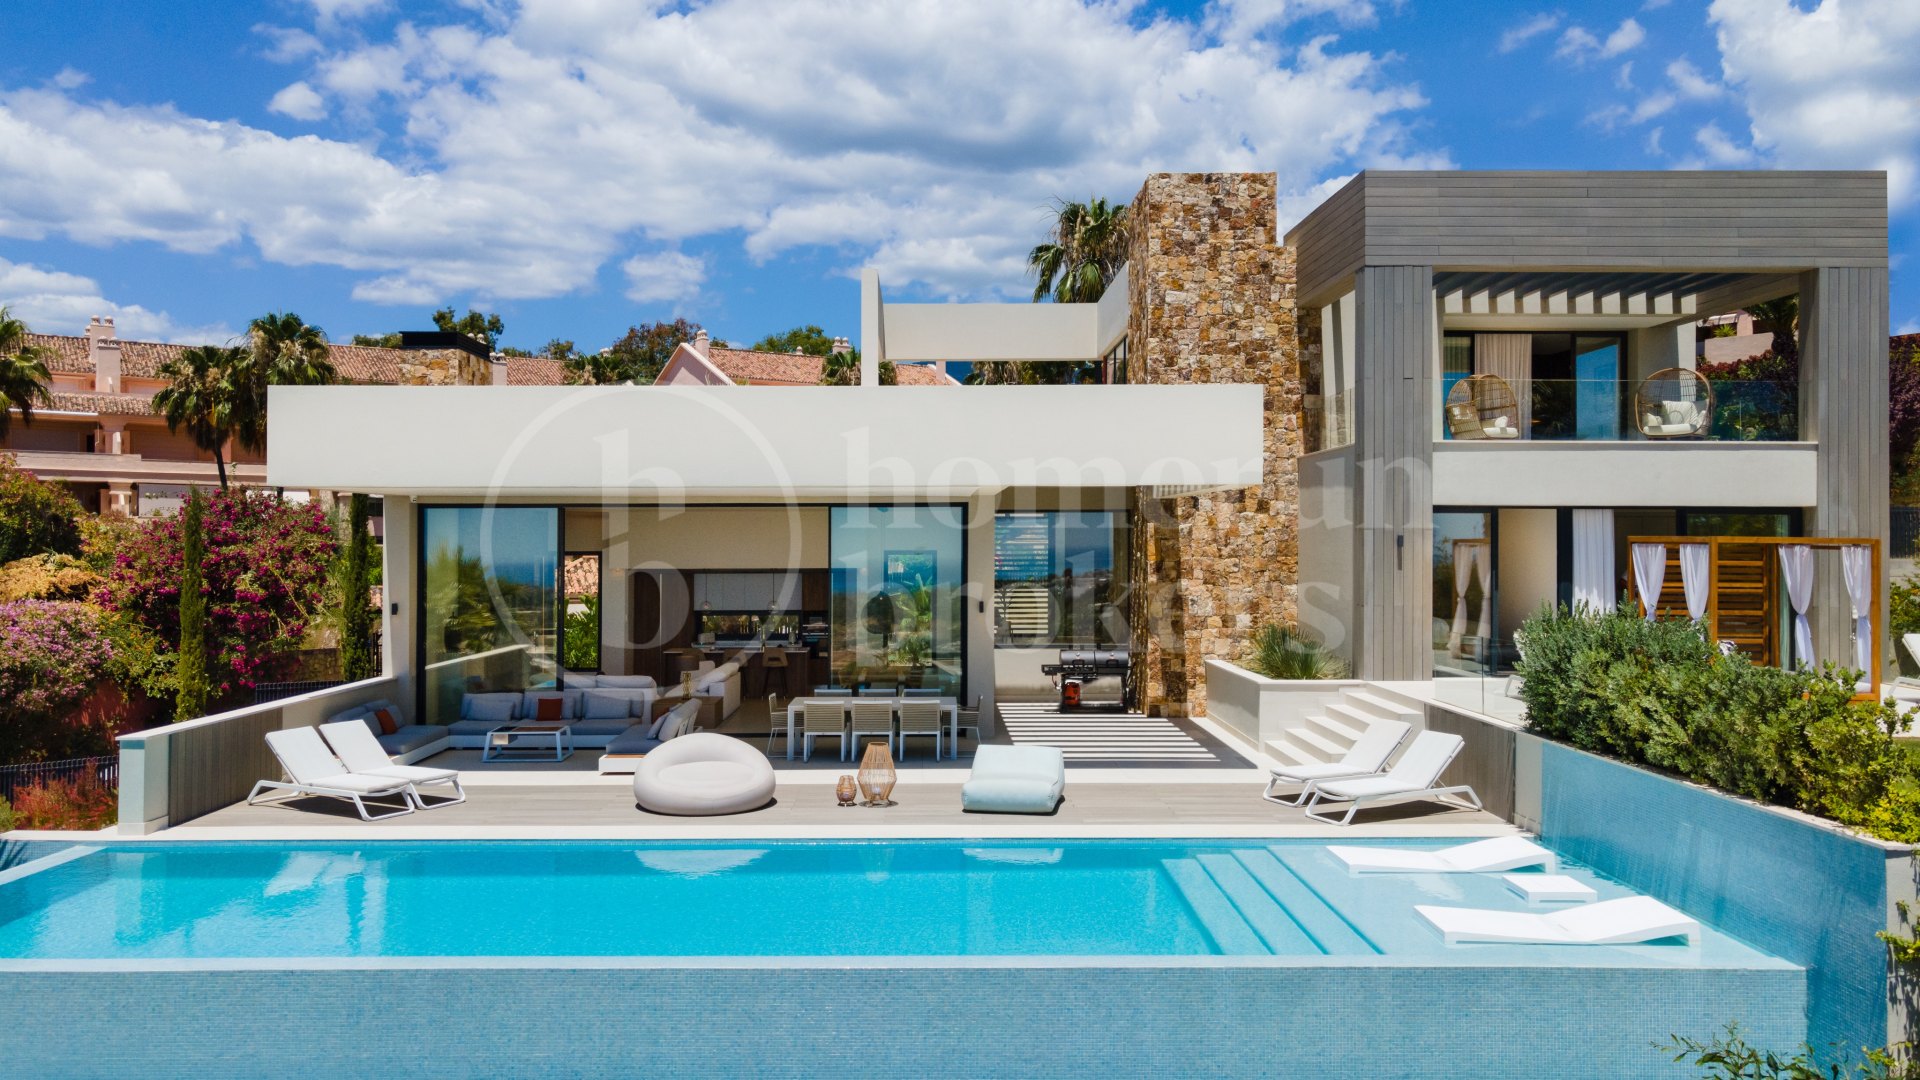 Anamaya 2 - Contemporary Villa located in the Golf Valley